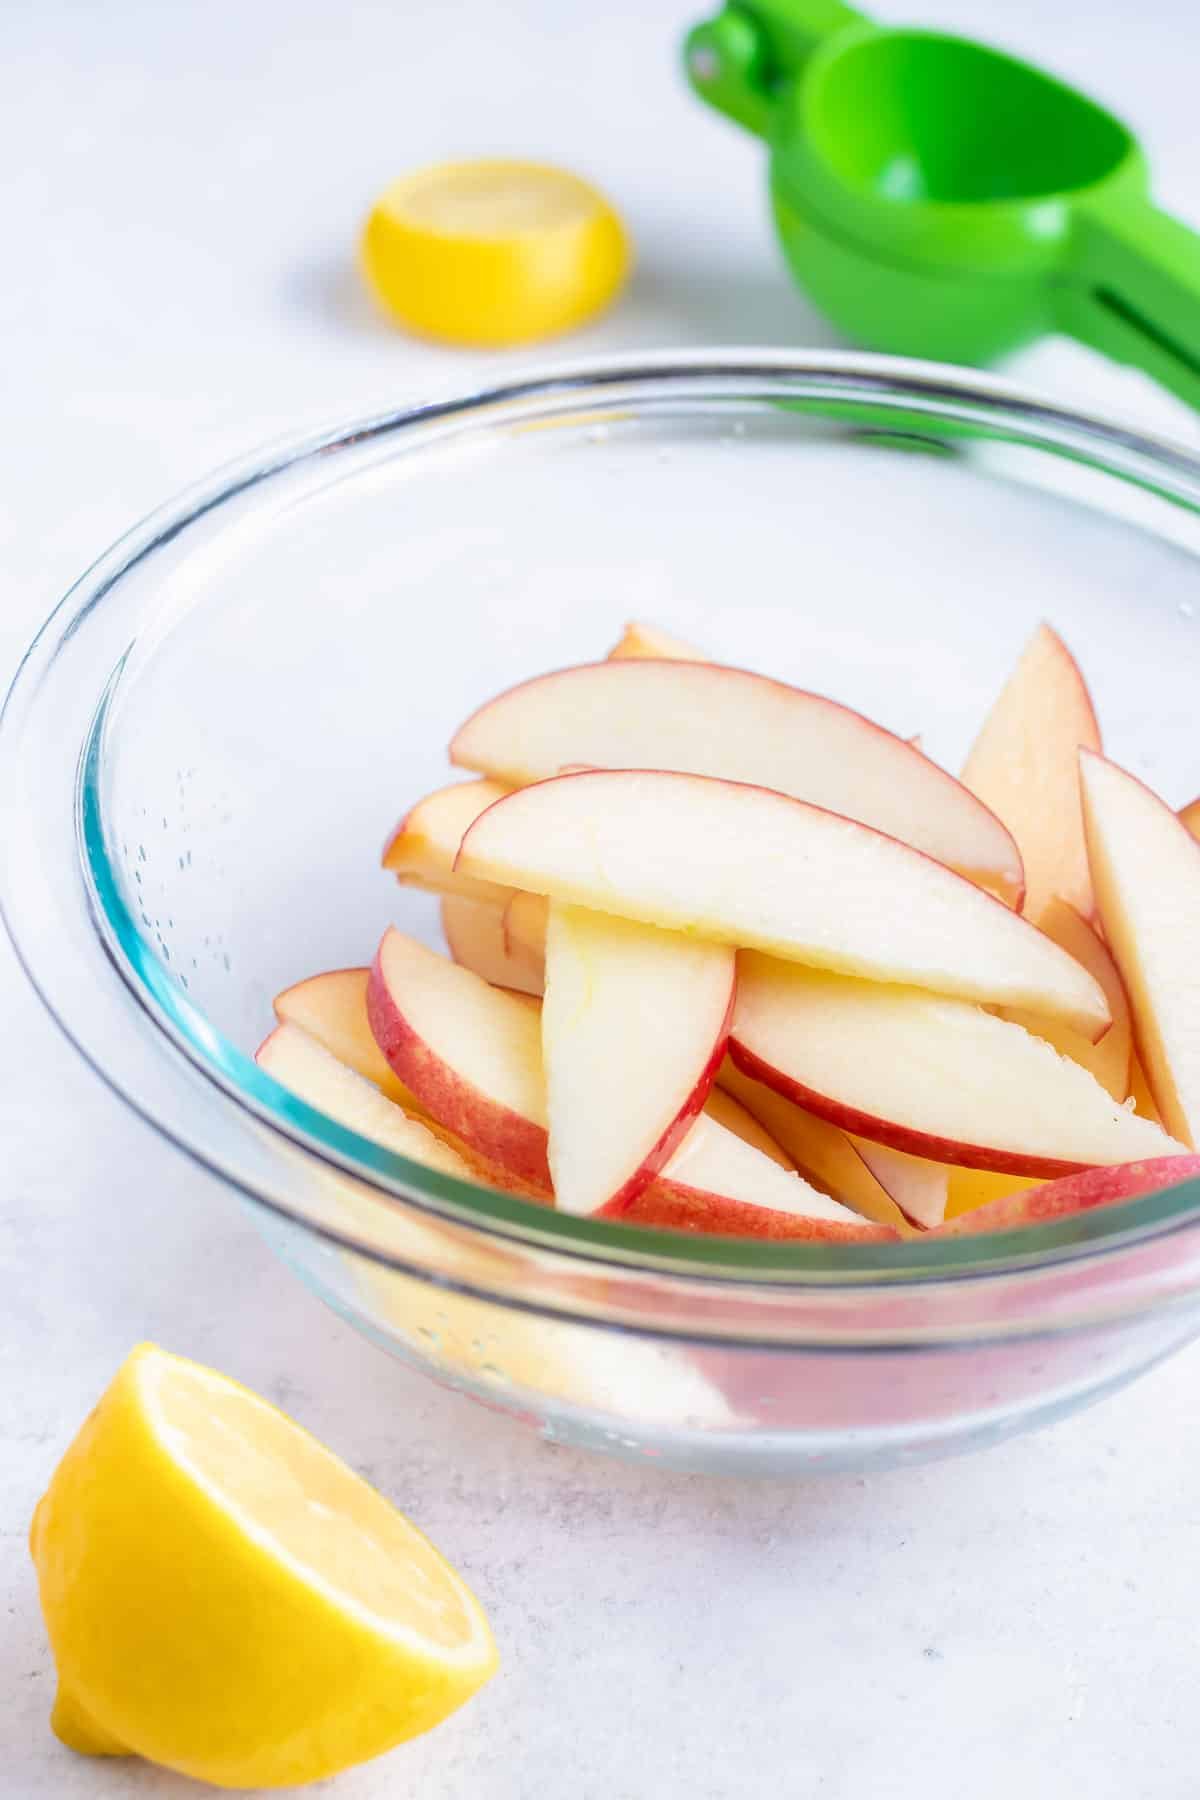 Fresh apple slices are placed in a bowl and tossed in lemon juice.